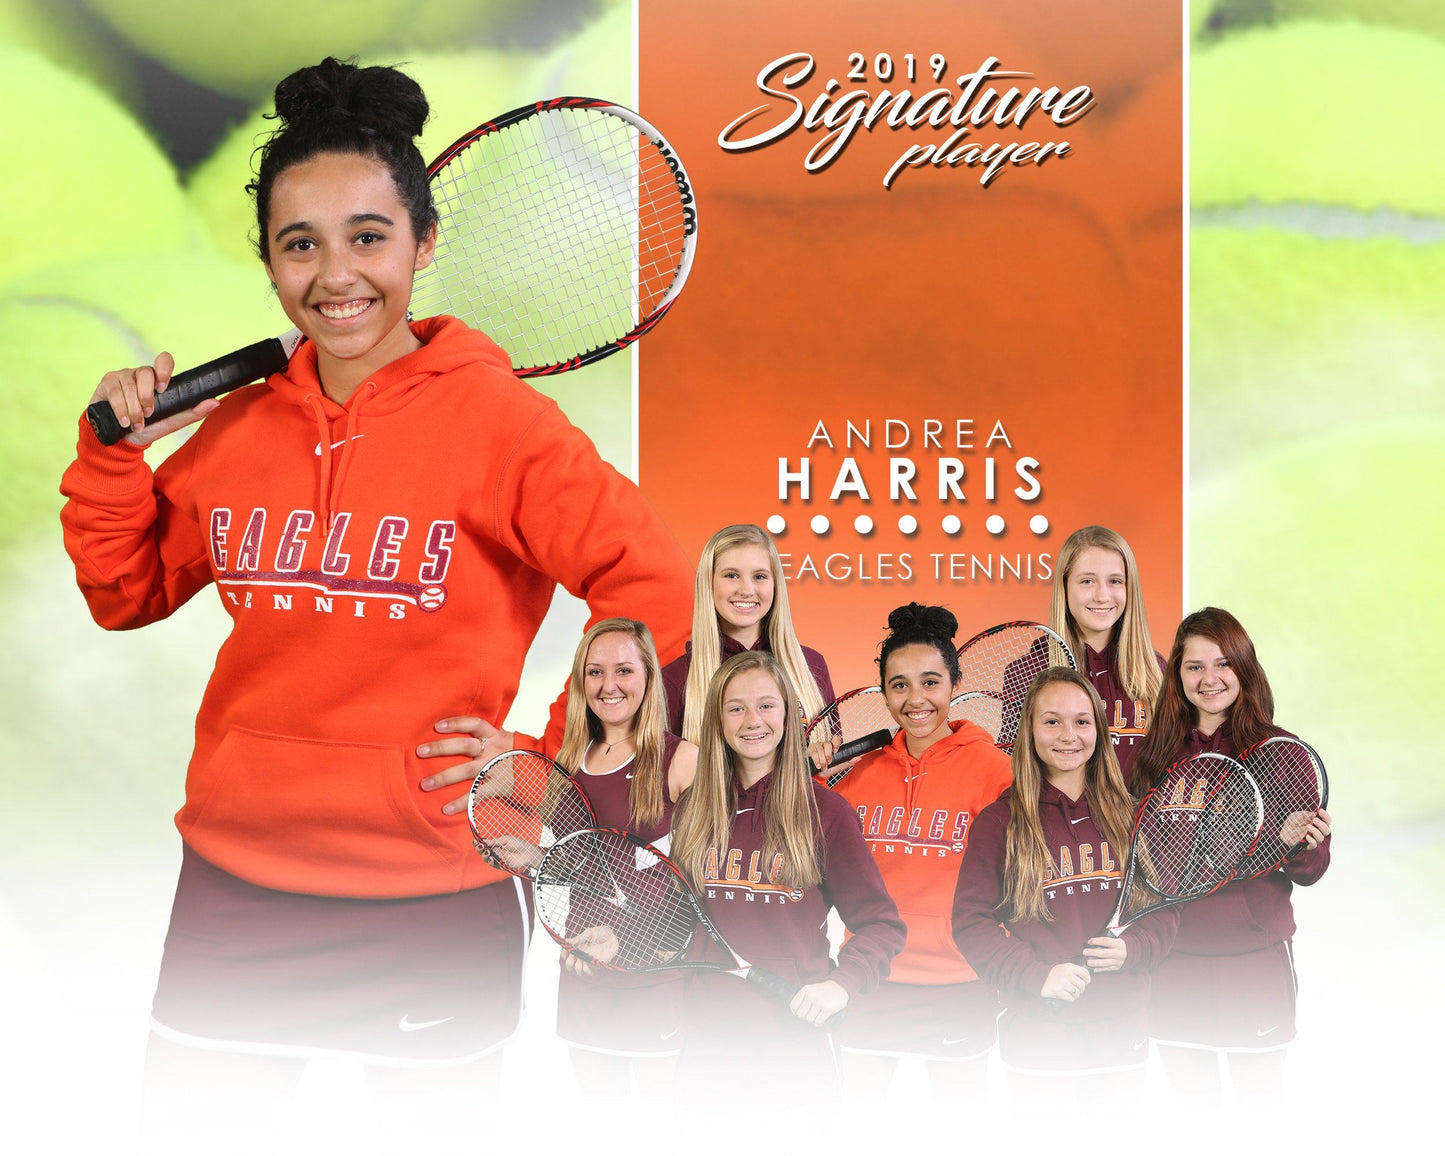 Signature Player - Tennis - V1 - T&I Extraction Collection-Photoshop Template - Photo Solutions